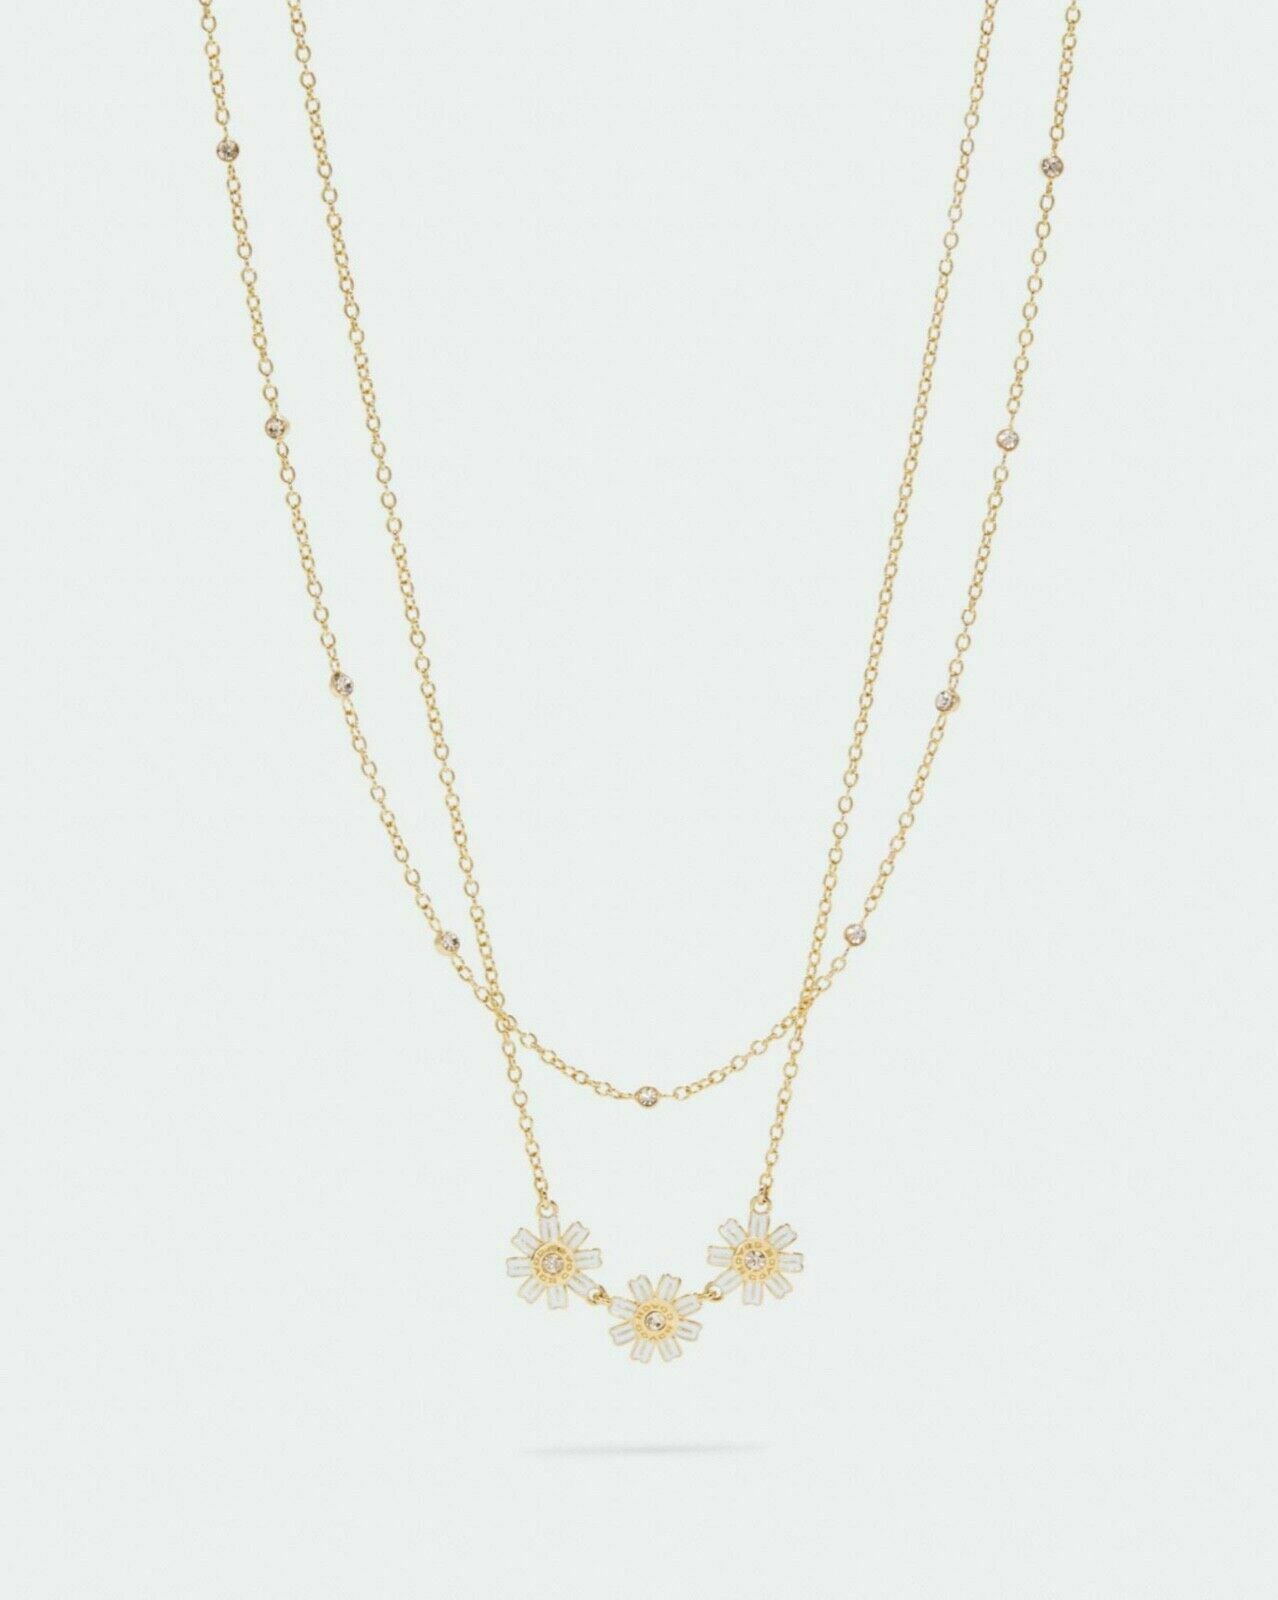 Coach Triple Daisy Layer Necklace Pendant Set Yellow Gold Plated Crystal Station - $98.01